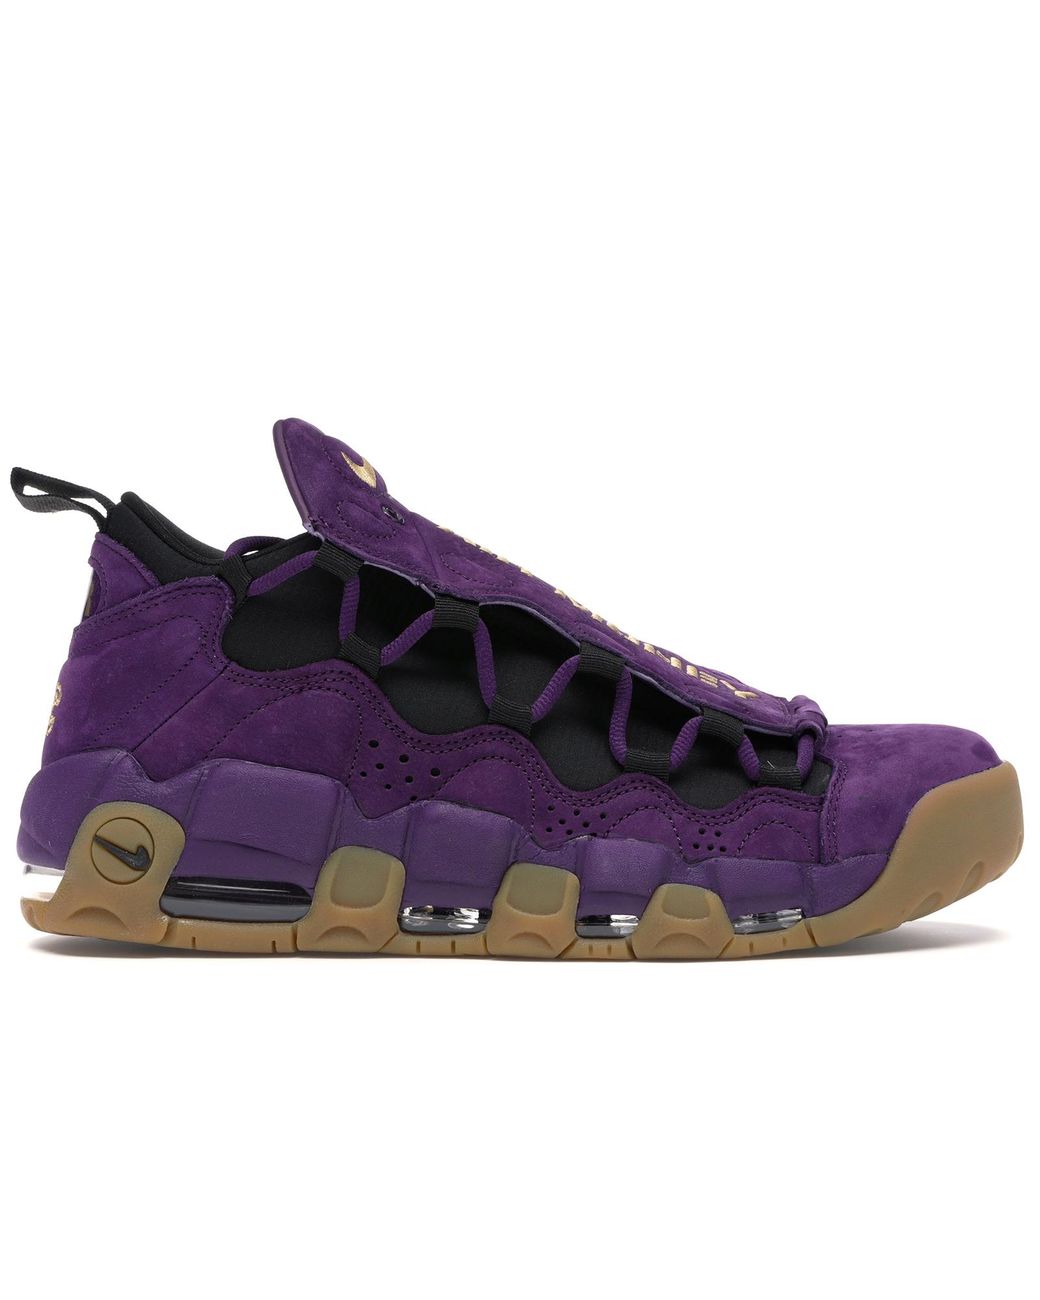 Nike Air More Money Night Purple for 